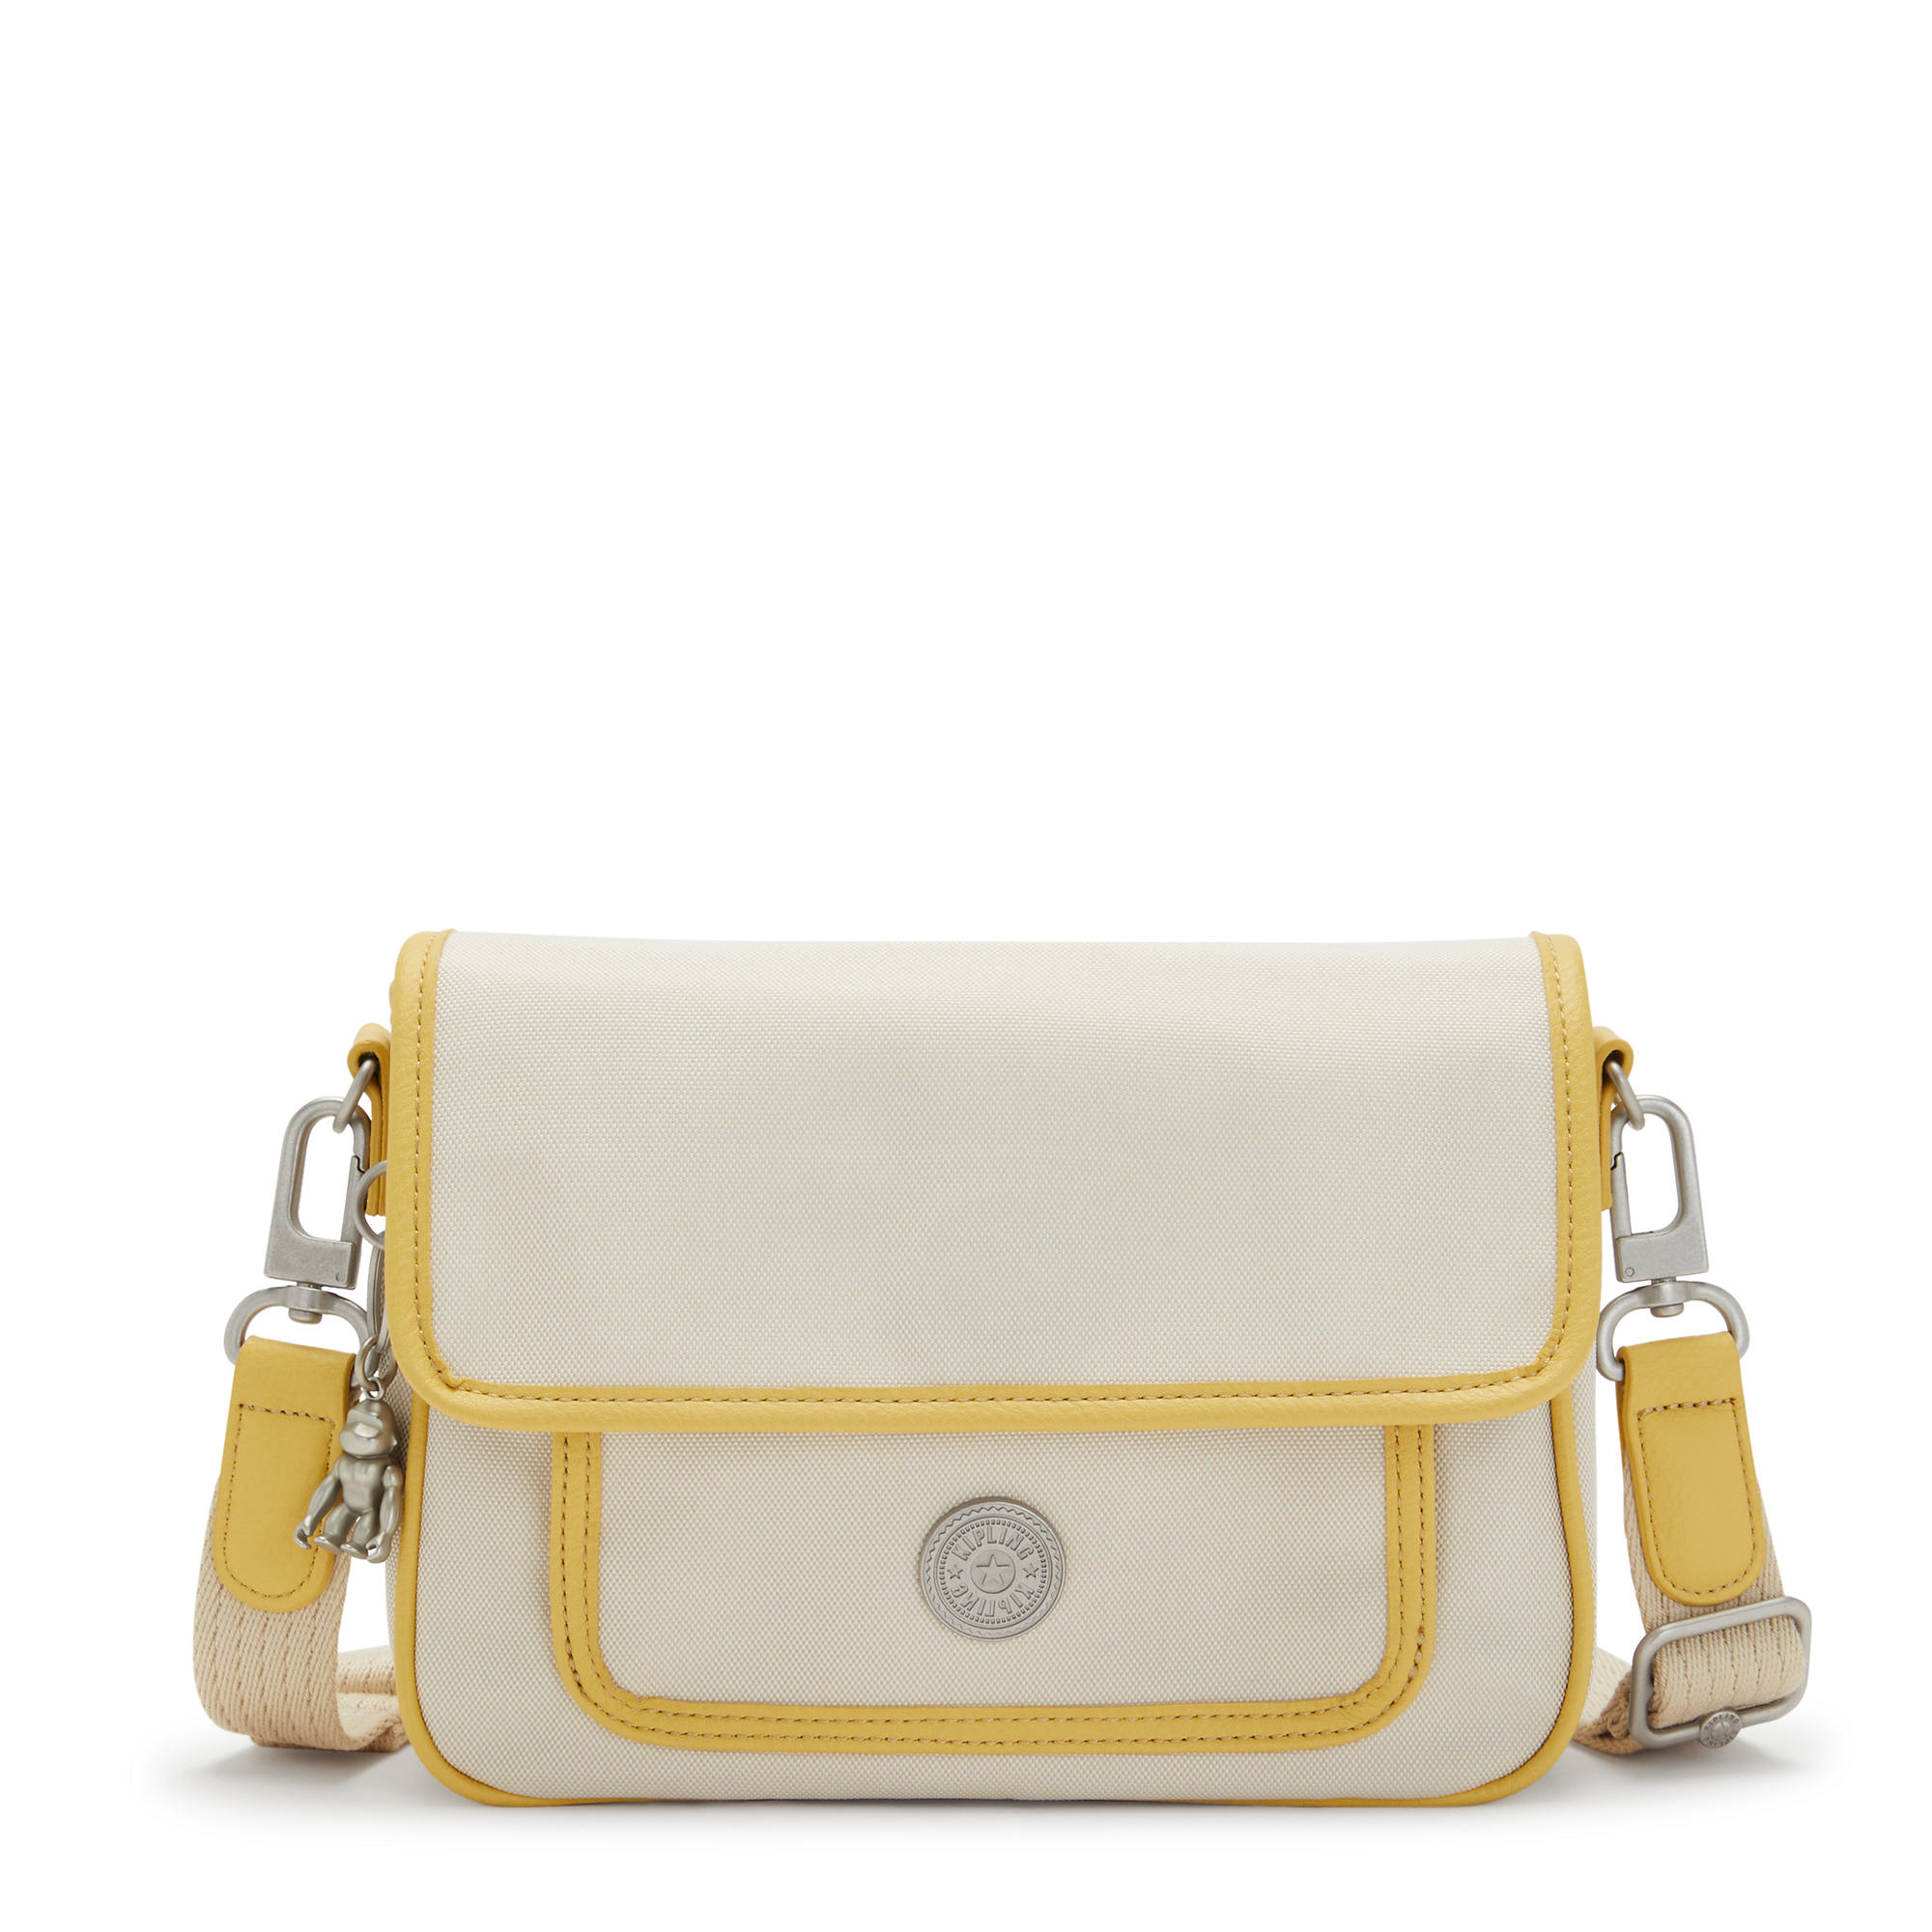 COACH Legacy Archival Two-Tone Leather Penny Shoulder Purse